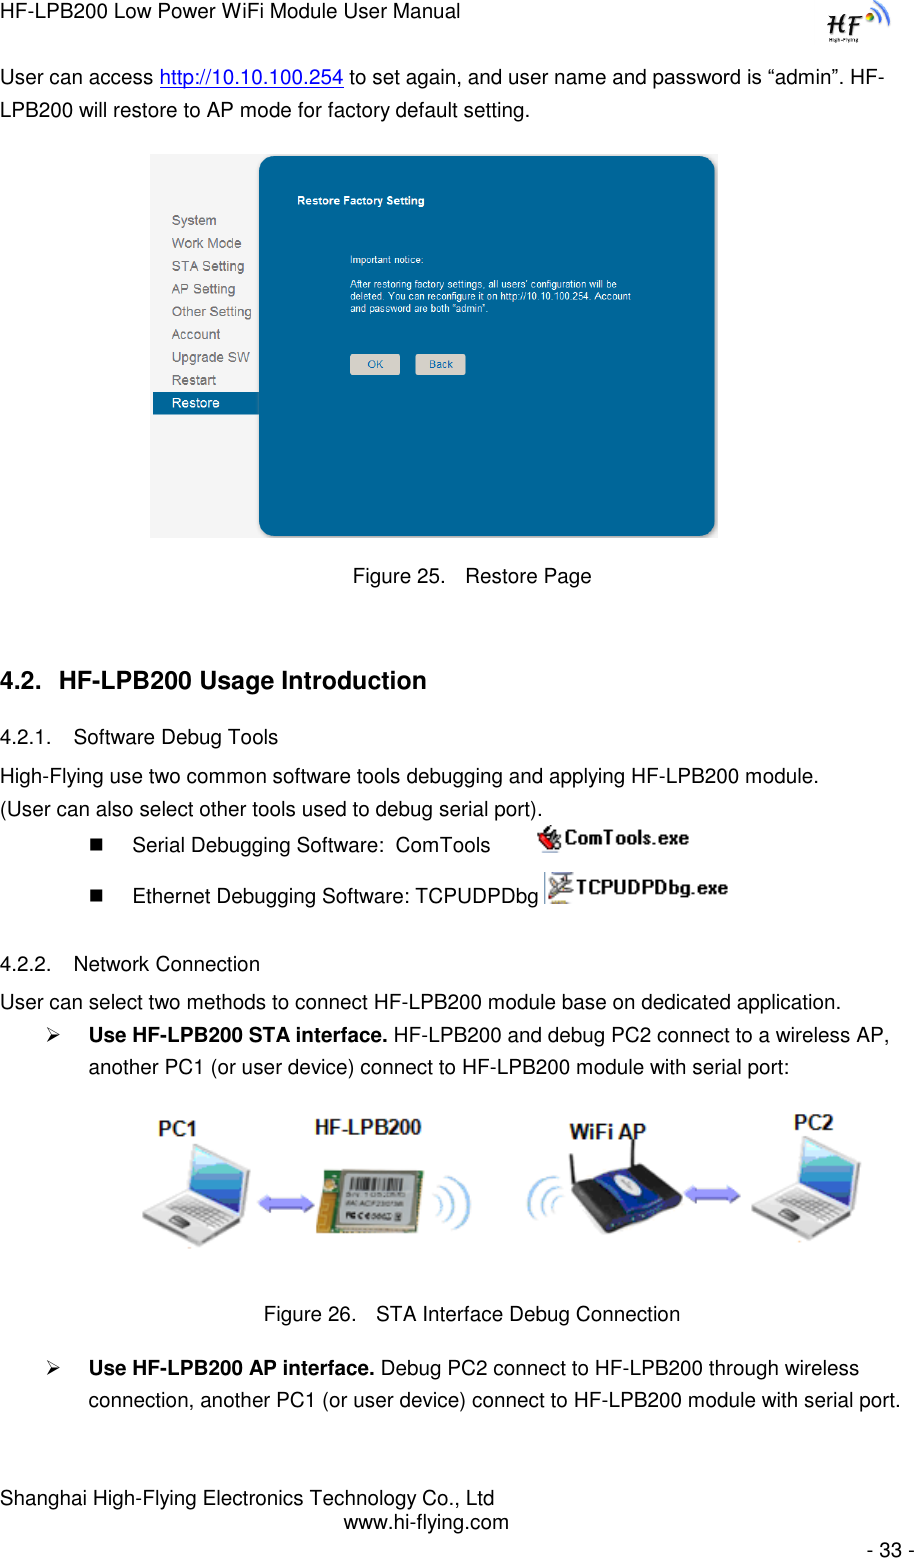 HF-LPB200 Low Power WiFi Module User Manual Shanghai High-Flying Electronics Technology Co., Ltd www.hi-flying.com   - 33 - User can access http://10.10.100.254 to set again, and user name and password is “admin”. HF-LPB200 will restore to AP mode for factory default setting.                      Figure 25. Restore Page 4.2. HF-LPB200 Usage Introduction 4.2.1. Software Debug Tools High-Flying use two common software tools debugging and applying HF-LPB200 module.  (User can also select other tools used to debug serial port).  Serial Debugging Software:  ComTools           Ethernet Debugging Software: TCPUDPDbg   4.2.2. Network Connection User can select two methods to connect HF-LPB200 module base on dedicated application.  Use HF-LPB200 STA interface. HF-LPB200 and debug PC2 connect to a wireless AP, another PC1 (or user device) connect to HF-LPB200 module with serial port:  Figure 26. STA Interface Debug Connection  Use HF-LPB200 AP interface. Debug PC2 connect to HF-LPB200 through wireless connection, another PC1 (or user device) connect to HF-LPB200 module with serial port. 